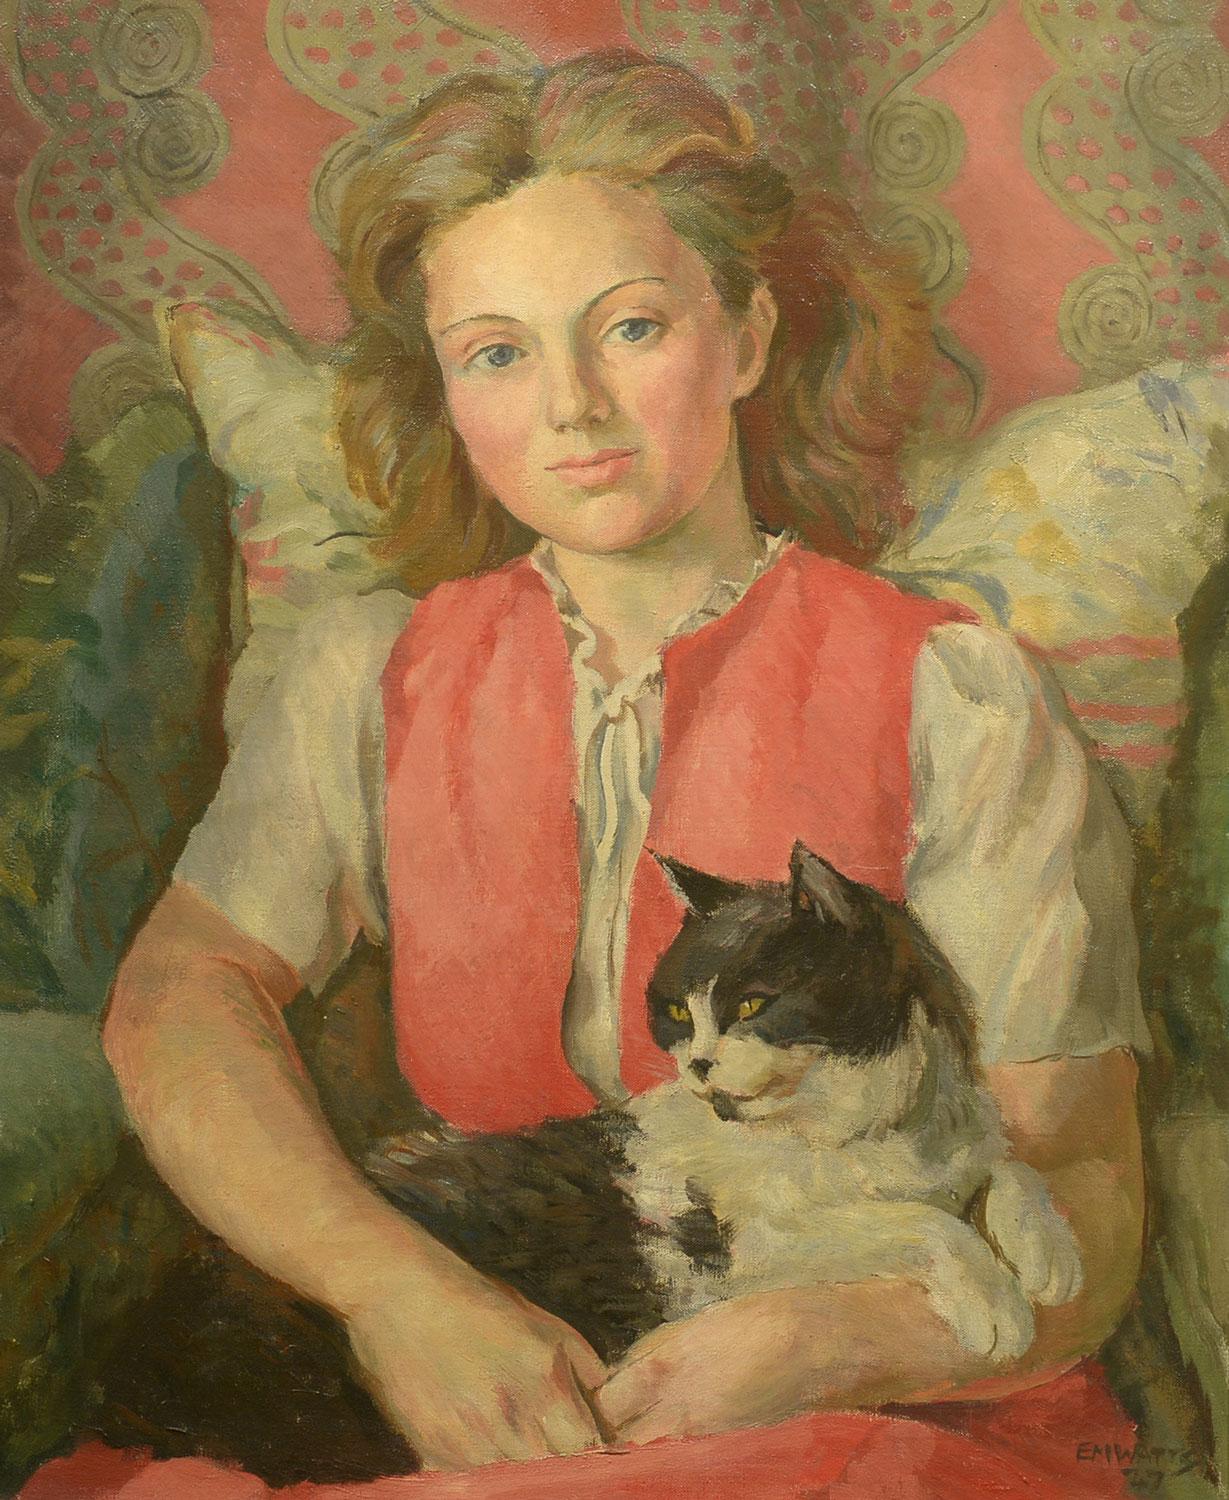 E. M. Watts Animal Painting - "A Girl with Her Cat, 1947, " EM Watts, oil on canvas, portrait